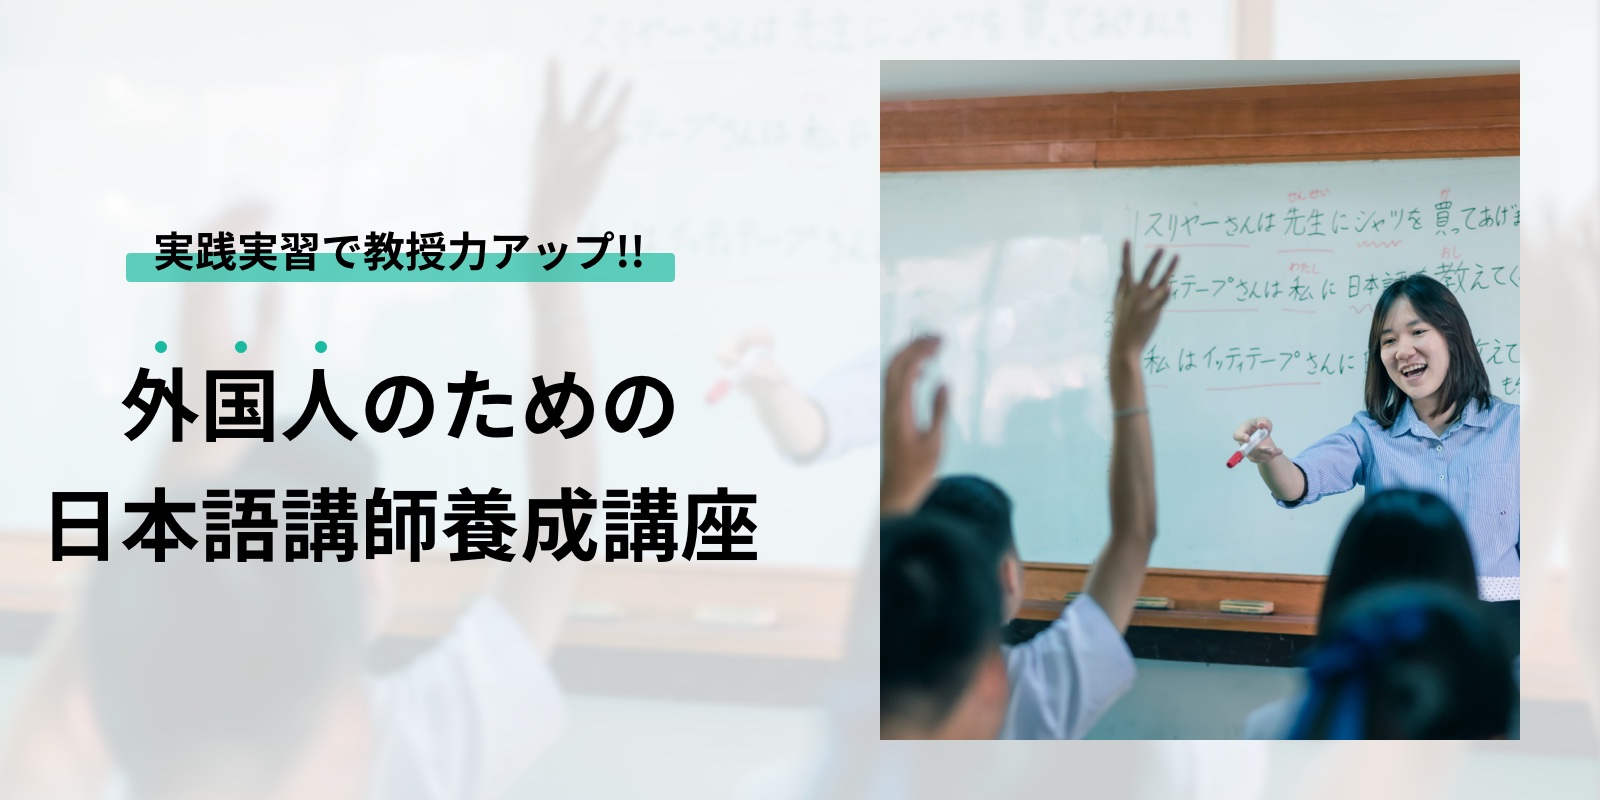 Japanese language teacher training course for foreigners